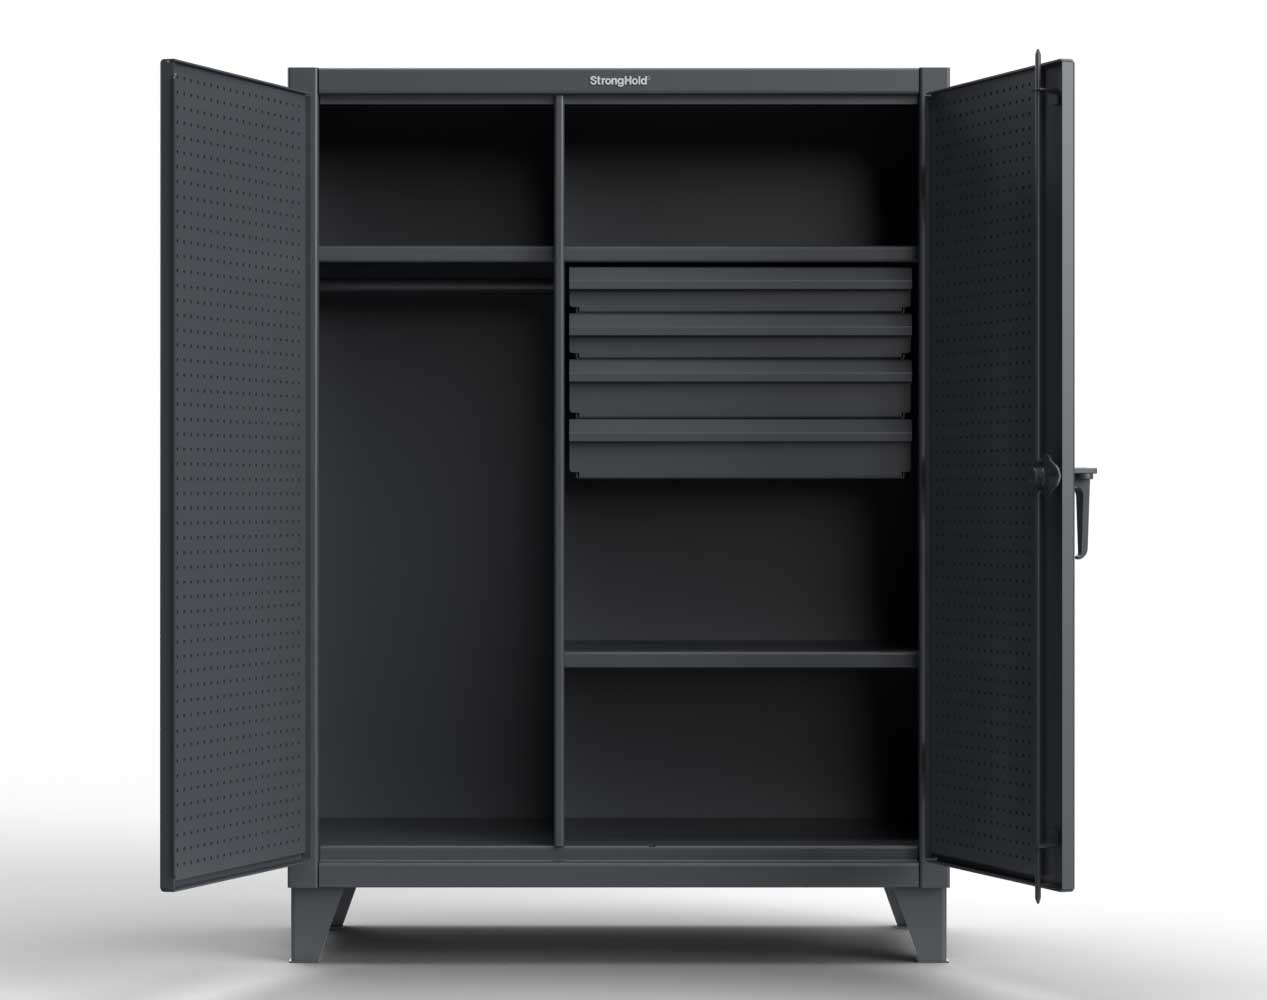 Extreme Duty 12 GA Uniform Cabinet with 4 Drawers, Pegboard, 3 Shelves - 48 In. W x 24 In. D x 66 In. H